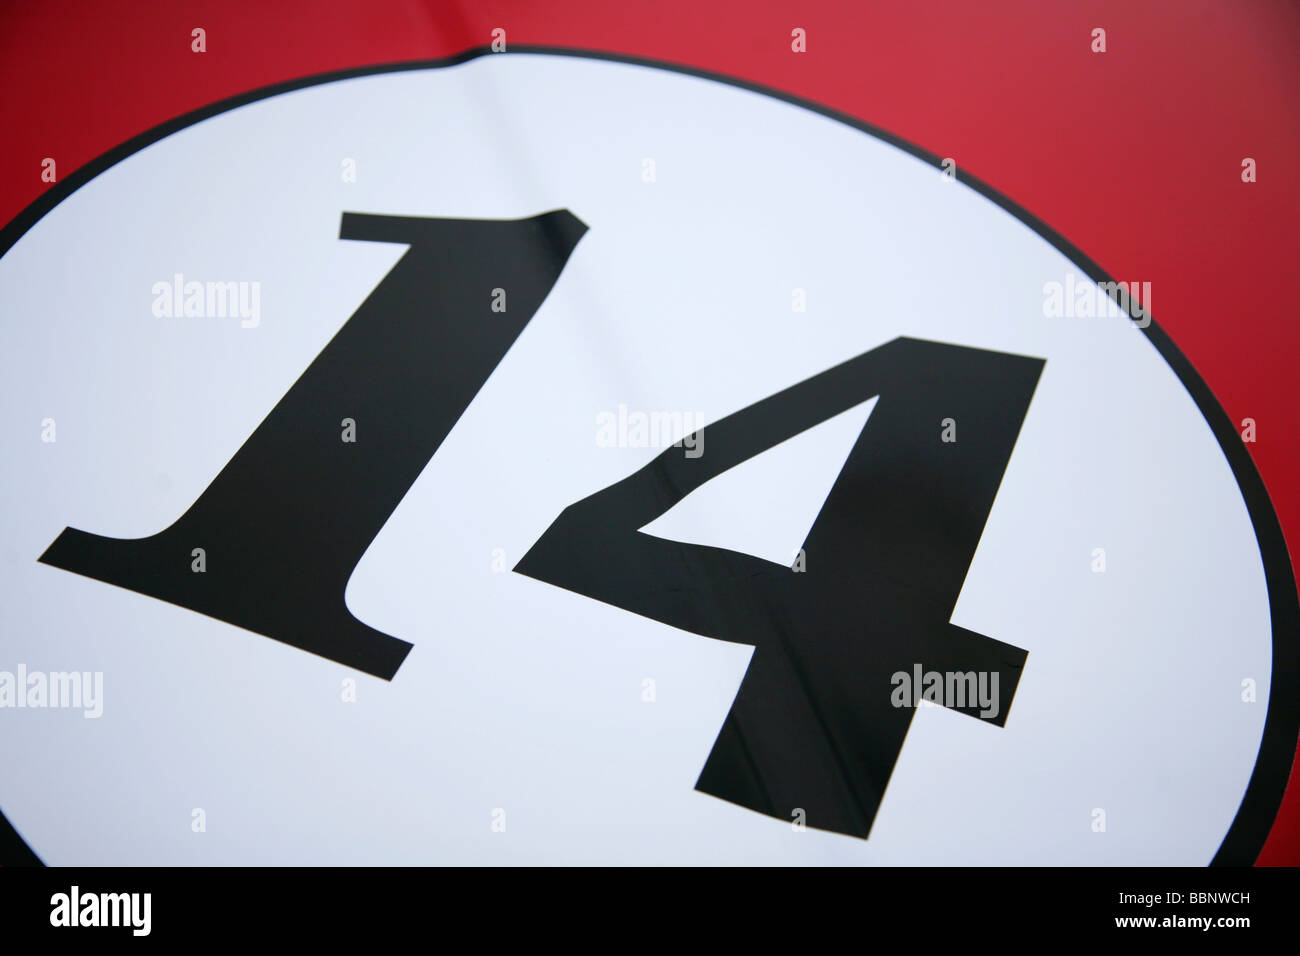 Number 14 in white circle on red background. Stock Photo